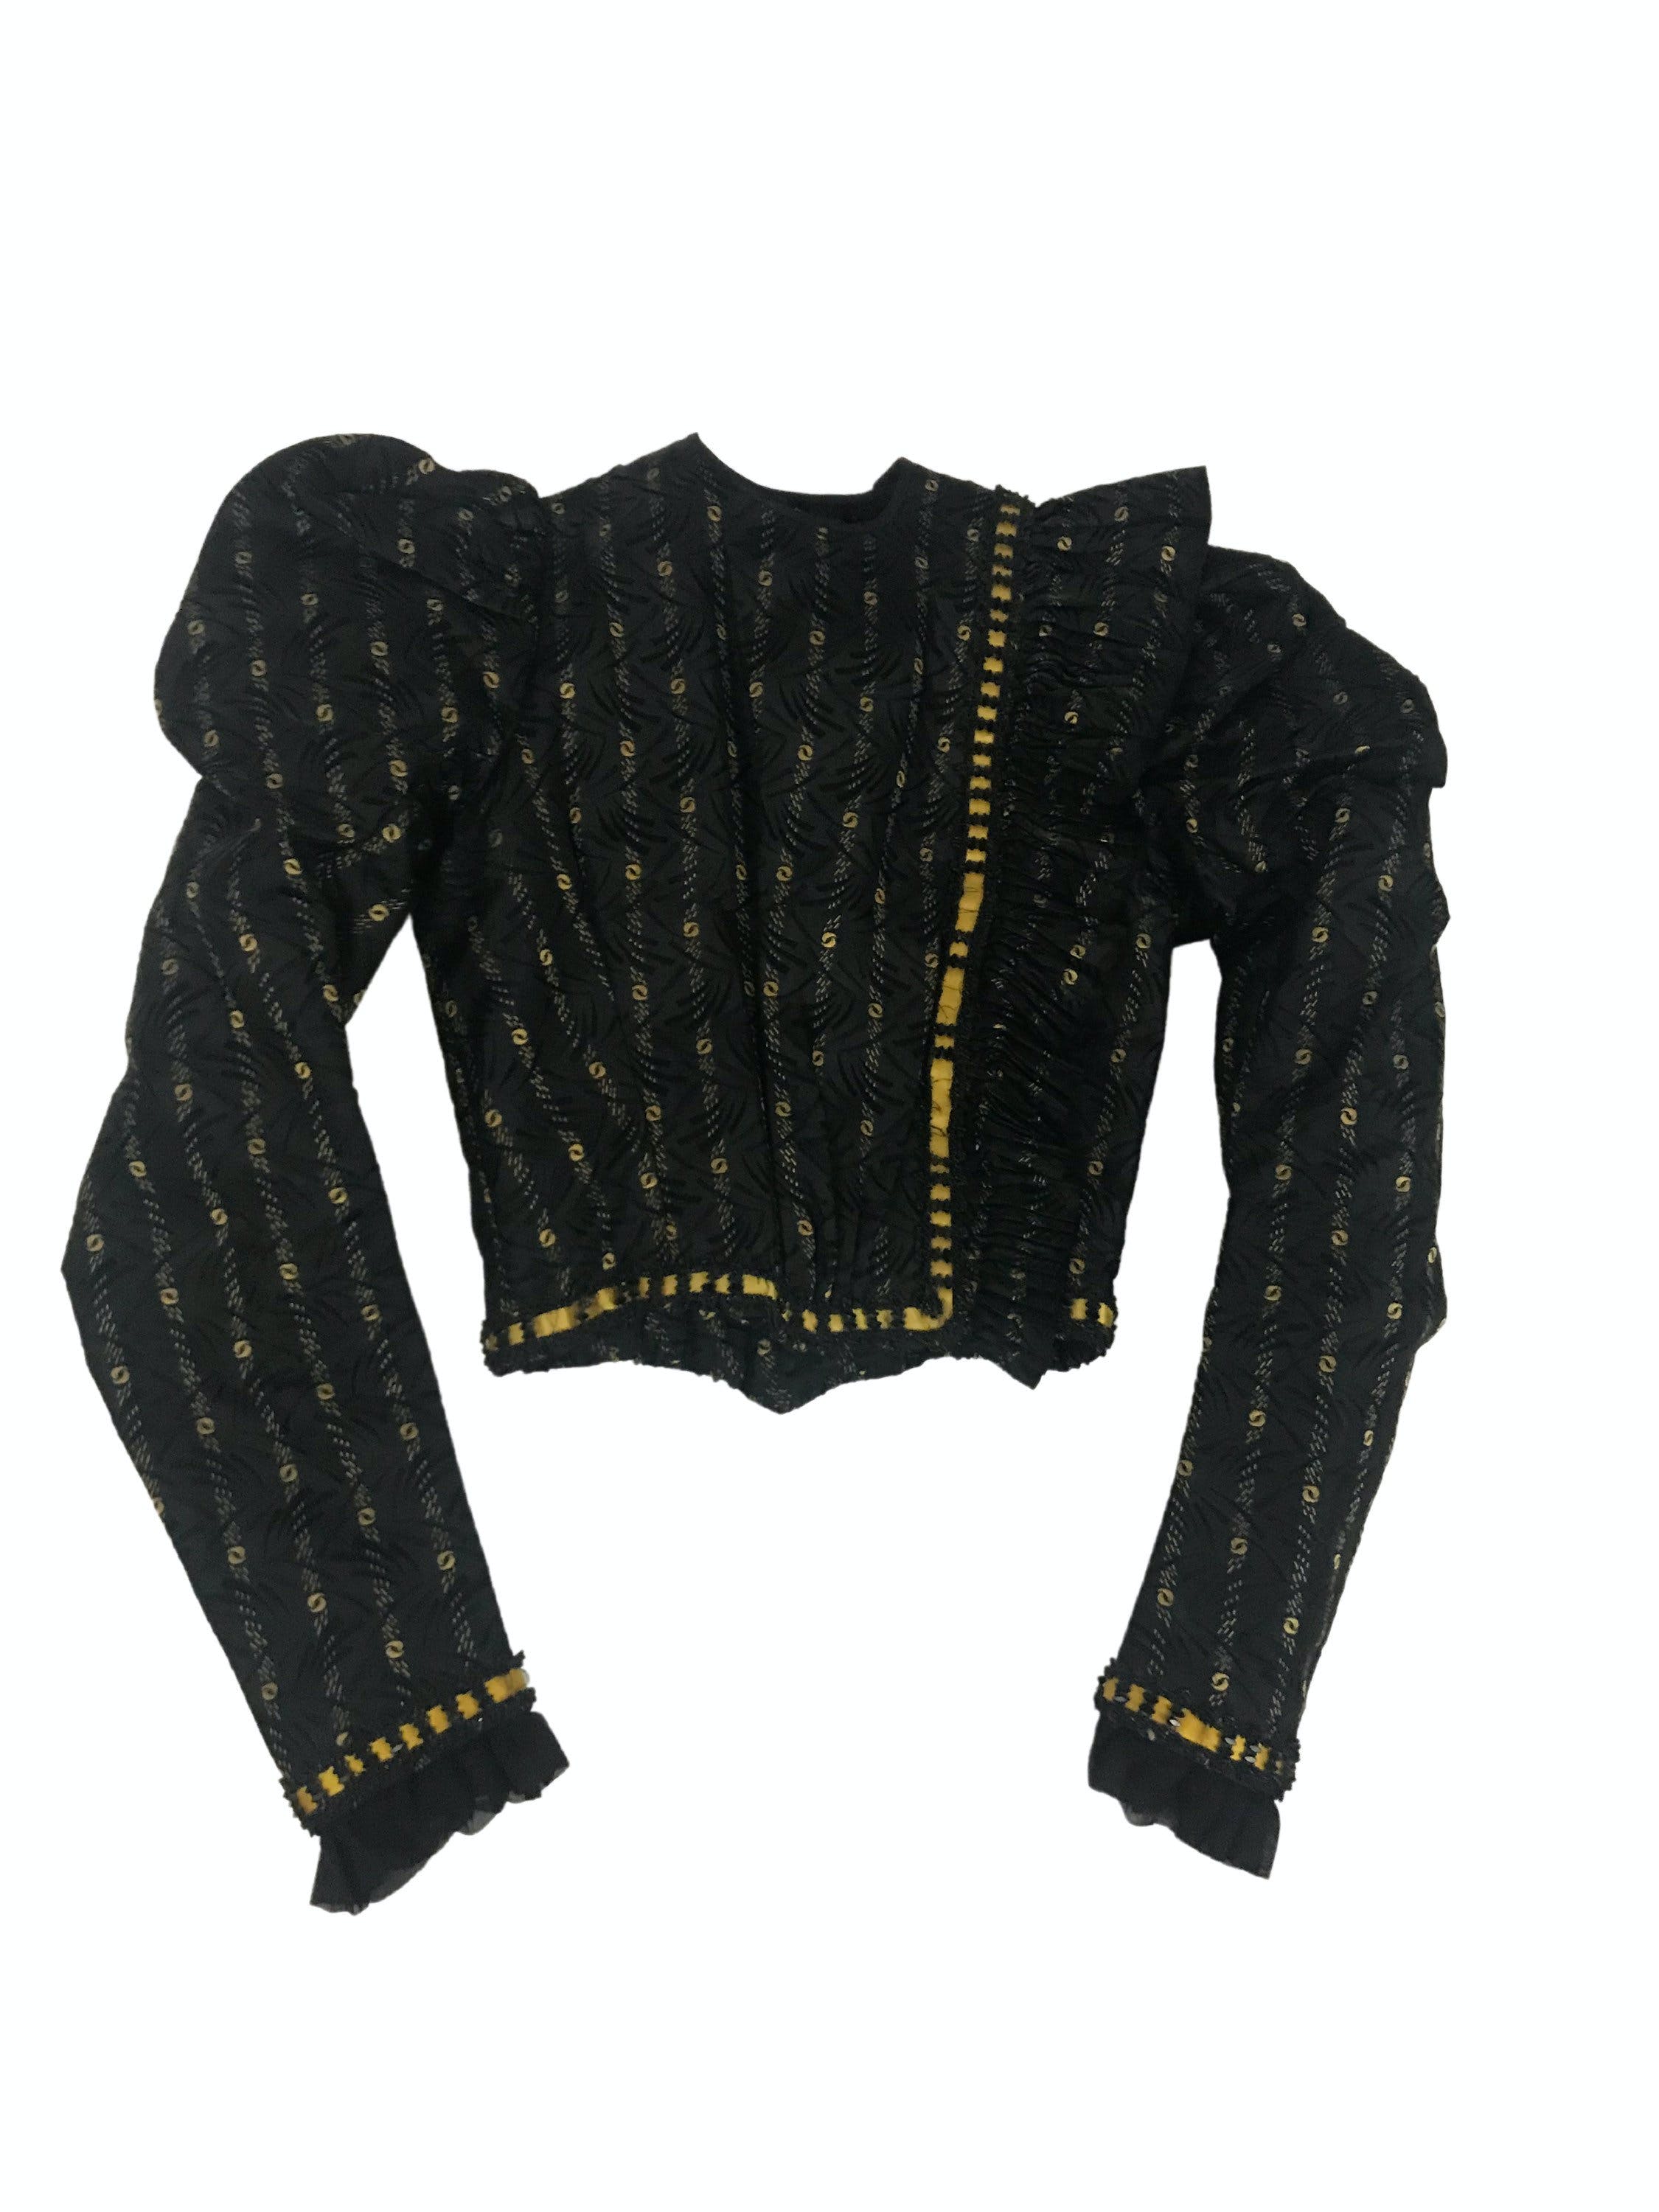 Vintage Antique 1900’s Black and Gold Beaded Embroidery Blouse | Shop ...